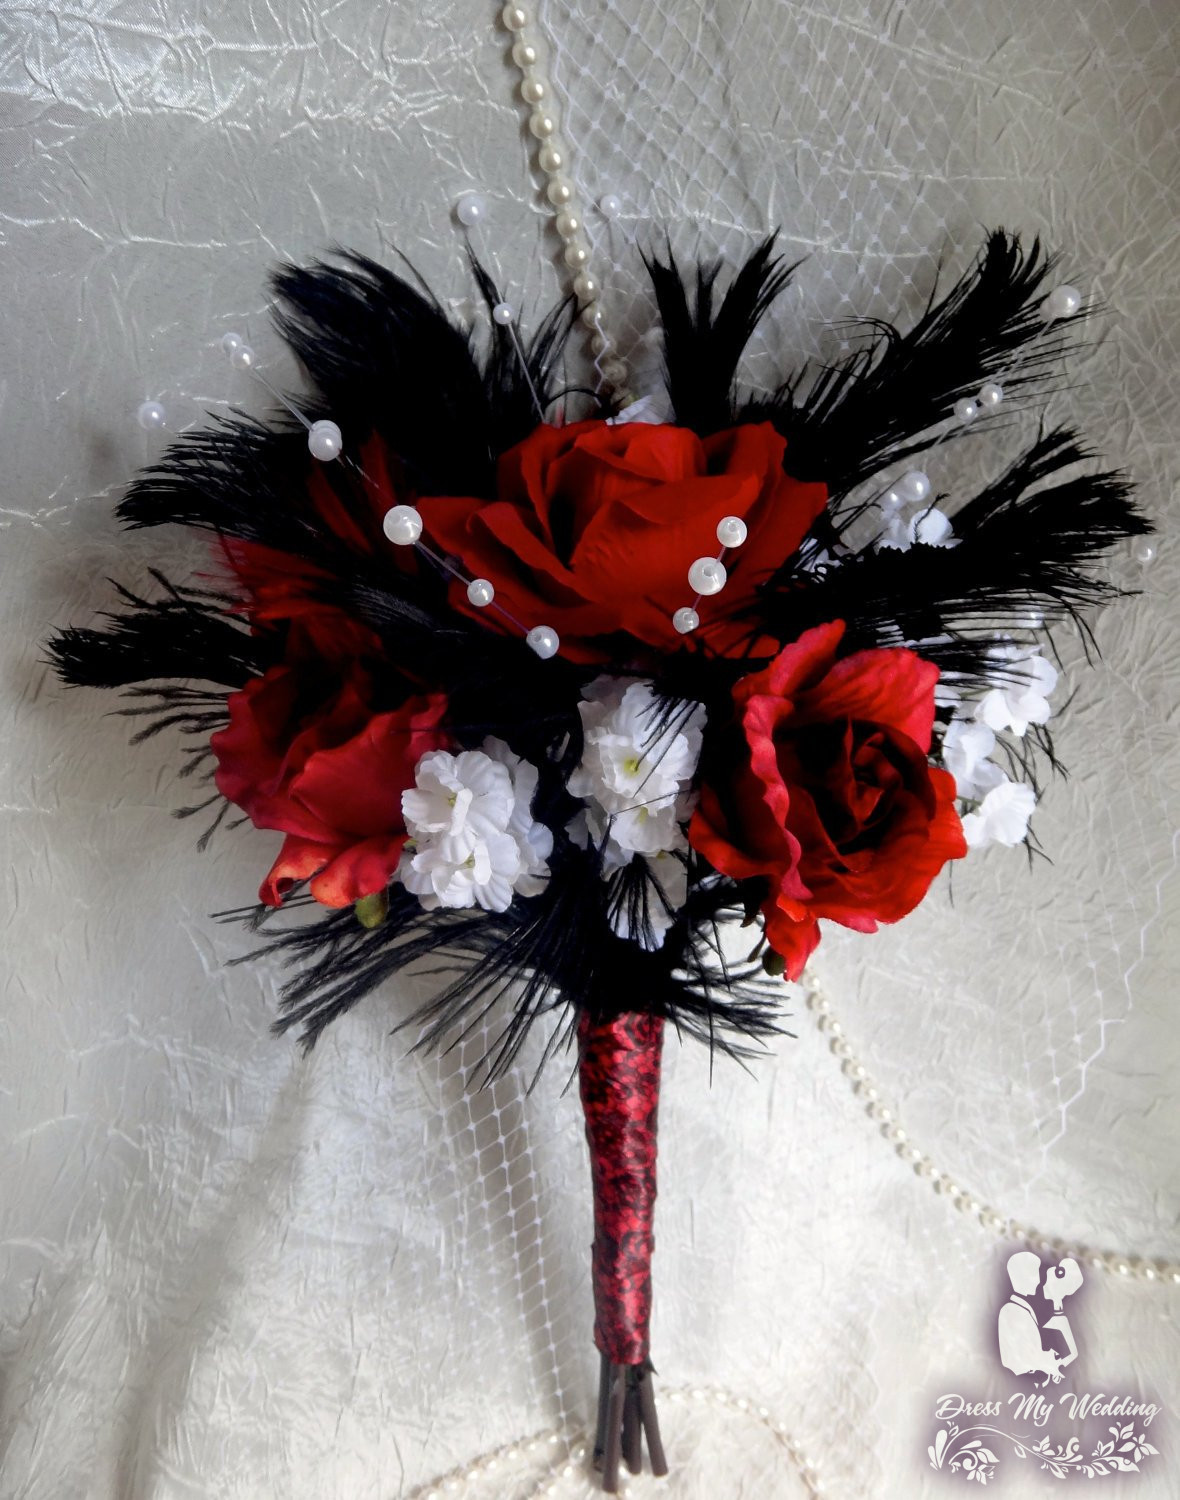 Dress My Wedding – Red rose black bridal bouquet, black ostrich fathers, white pearl accent, sale